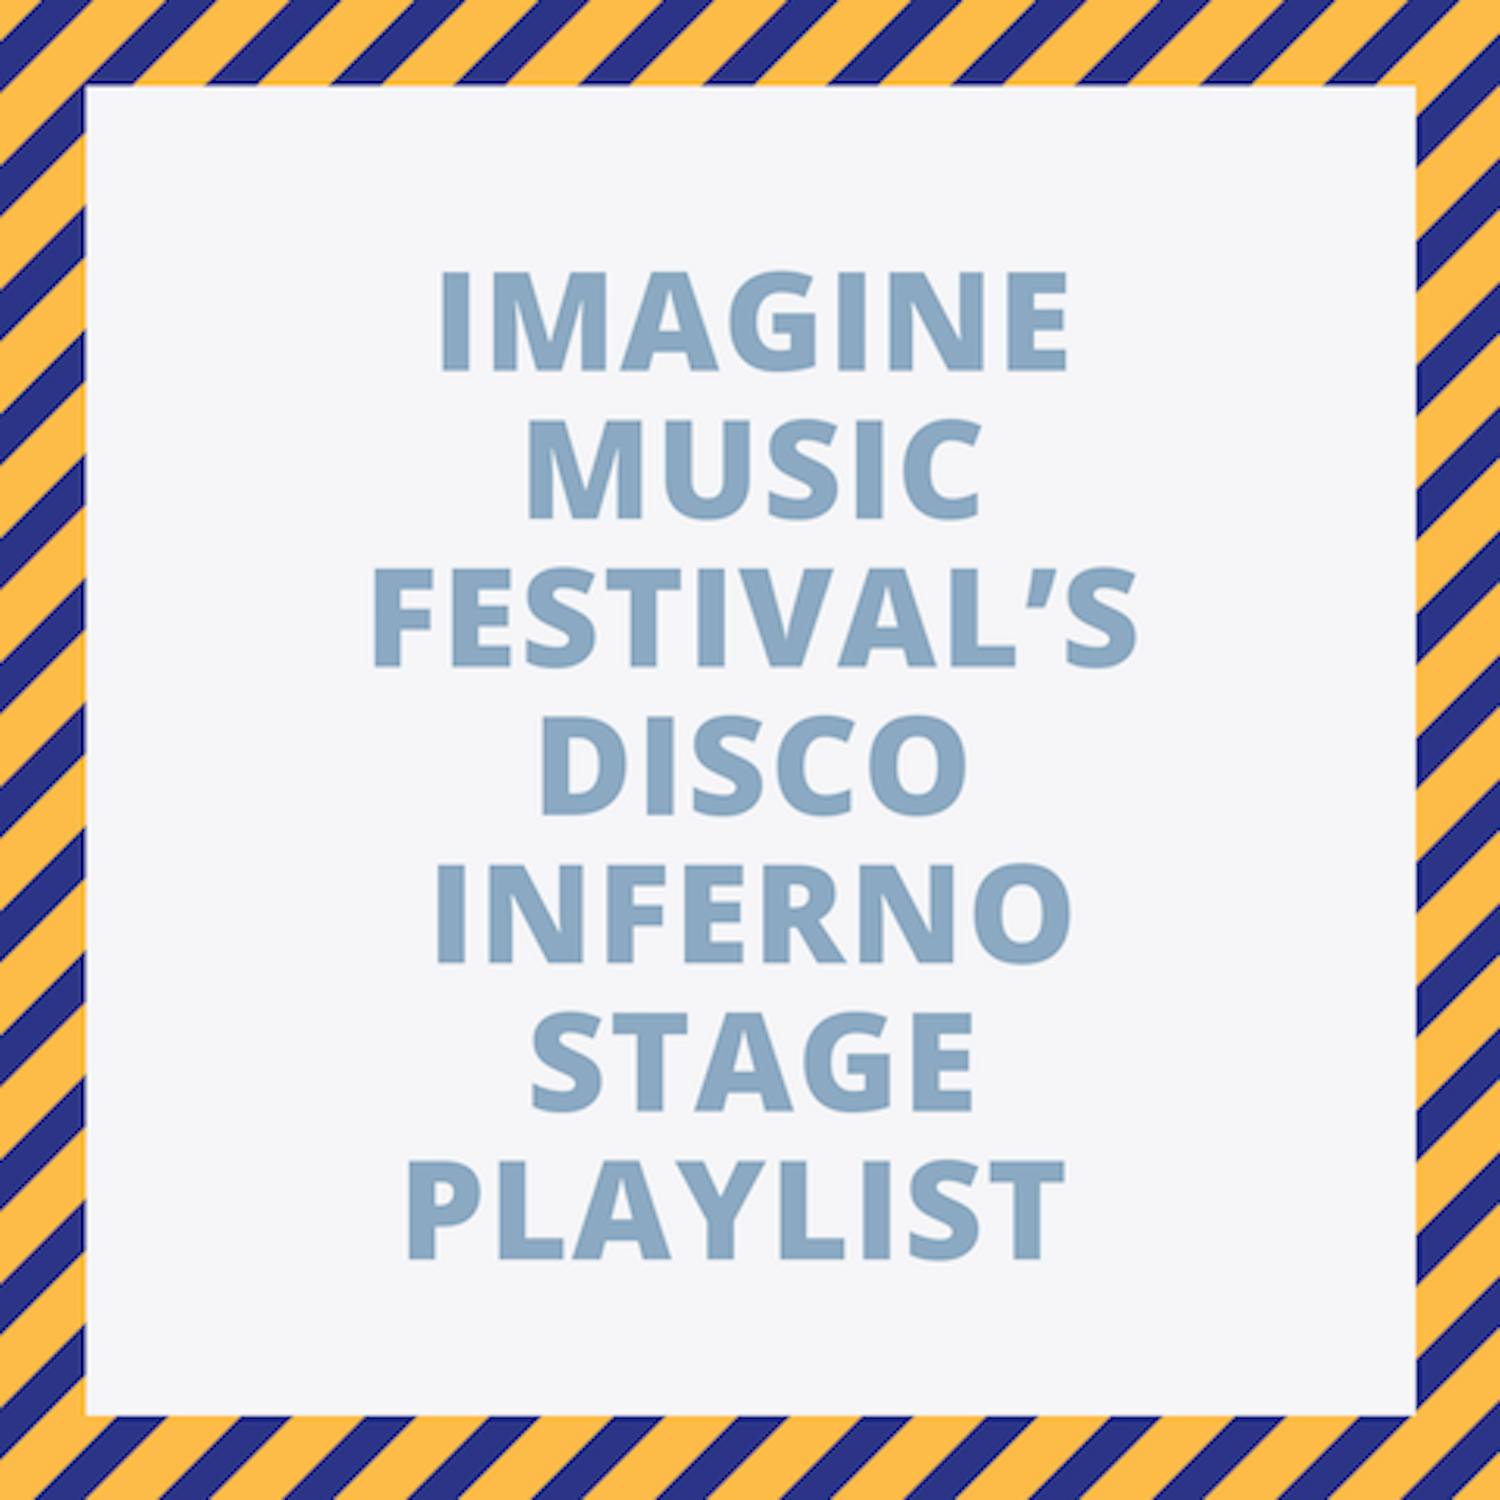 IMAGINE MUSIC FESTIVAL’S DISCO INFERNO STAGE PLAYLIST.png